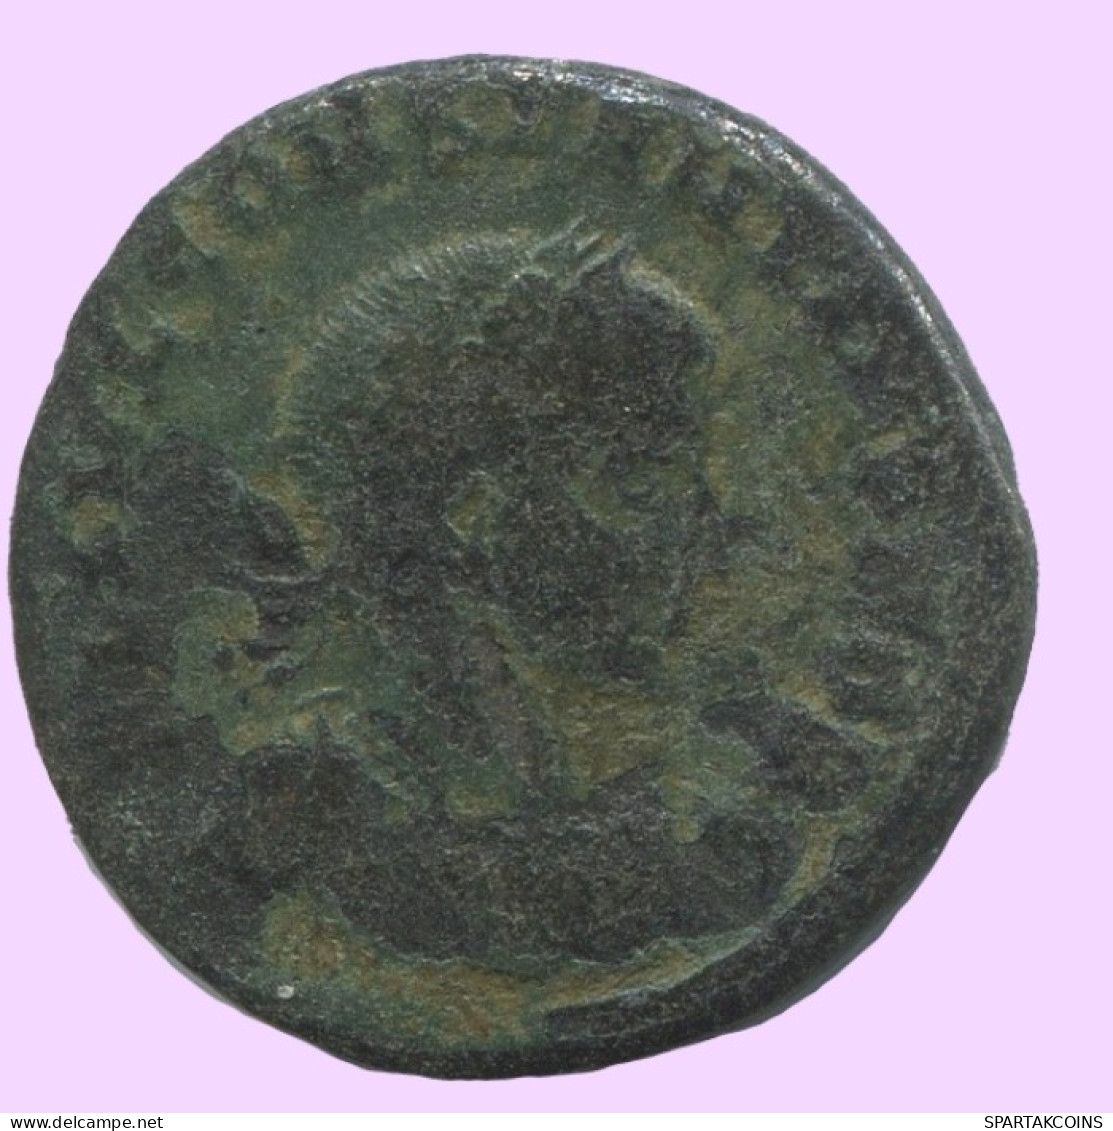 LATE ROMAN EMPIRE Follis Ancient Authentic Roman Coin 2.6g/18mm #ANT2014.7.U.A - The End Of Empire (363 AD To 476 AD)